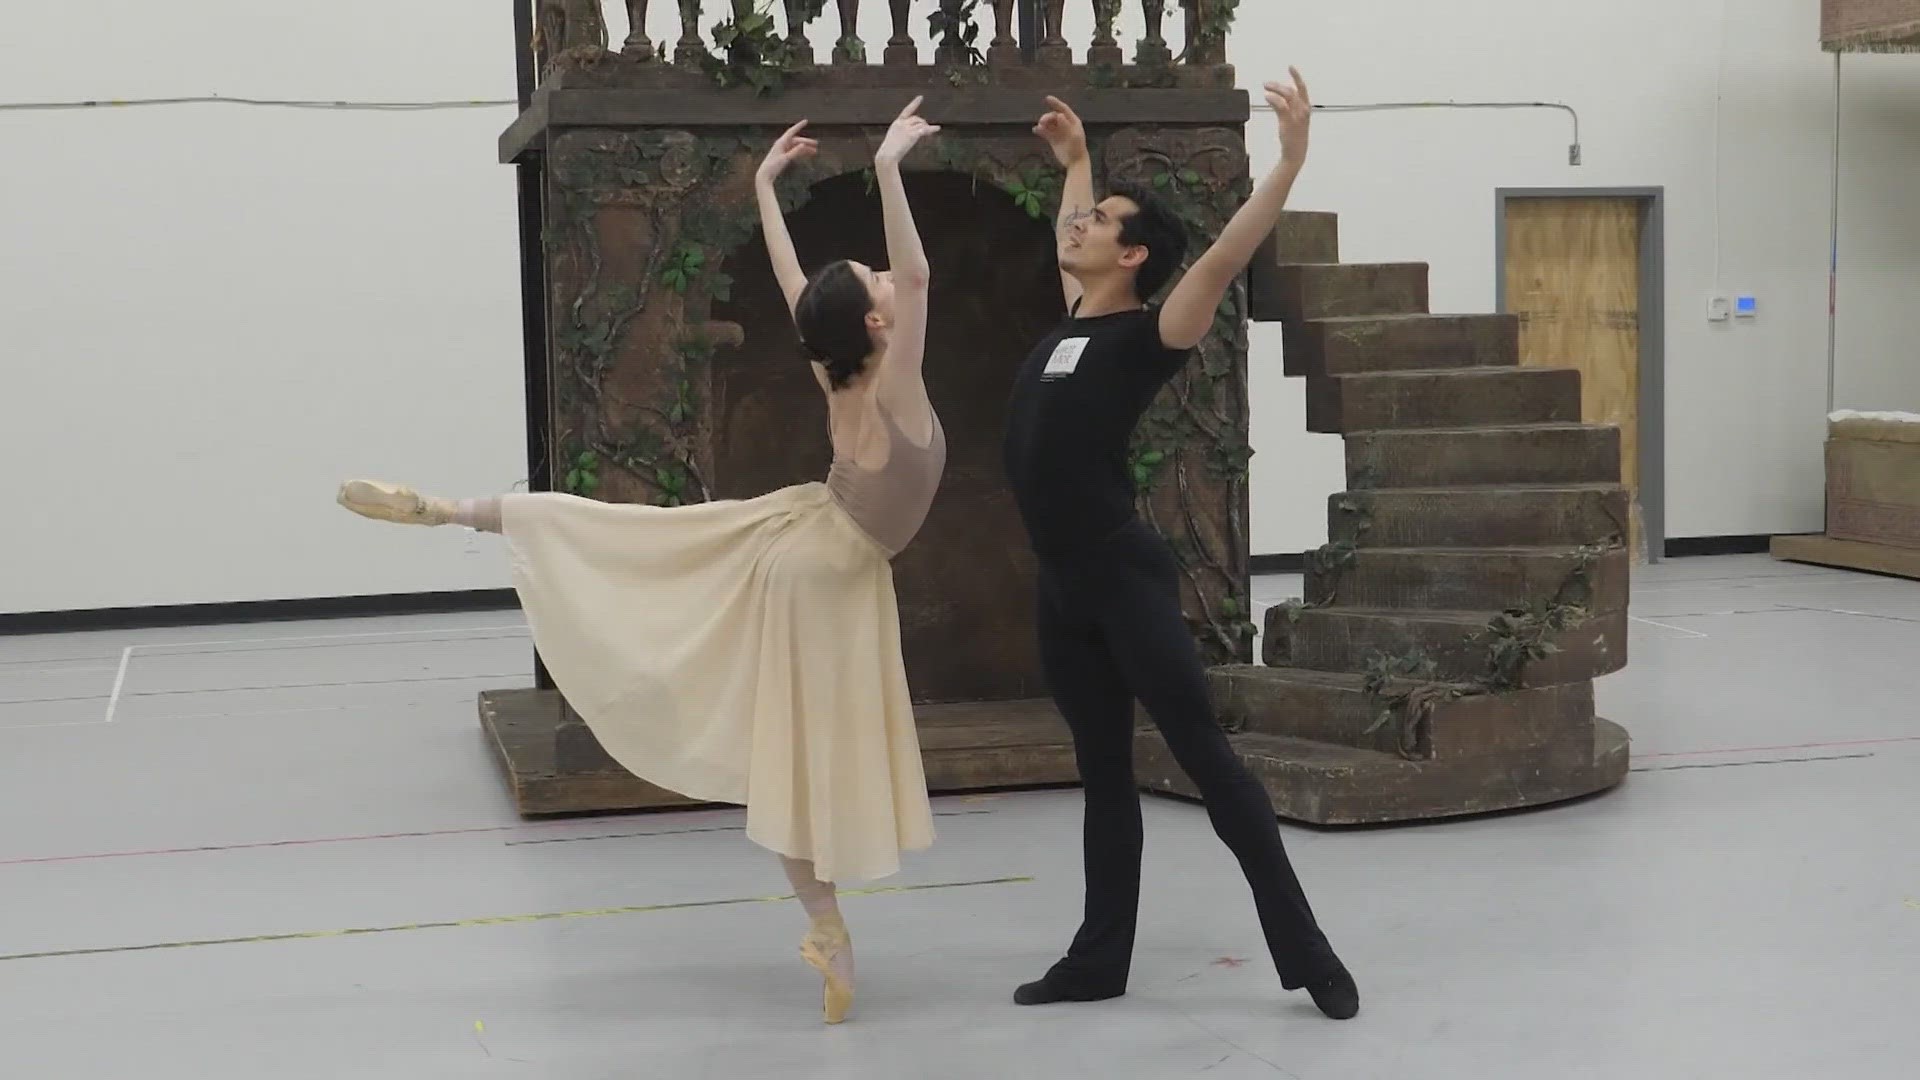 BalletMet's "Romeo and Juliet" runs five shows from Friday, April 26 through Sunday, April 28.